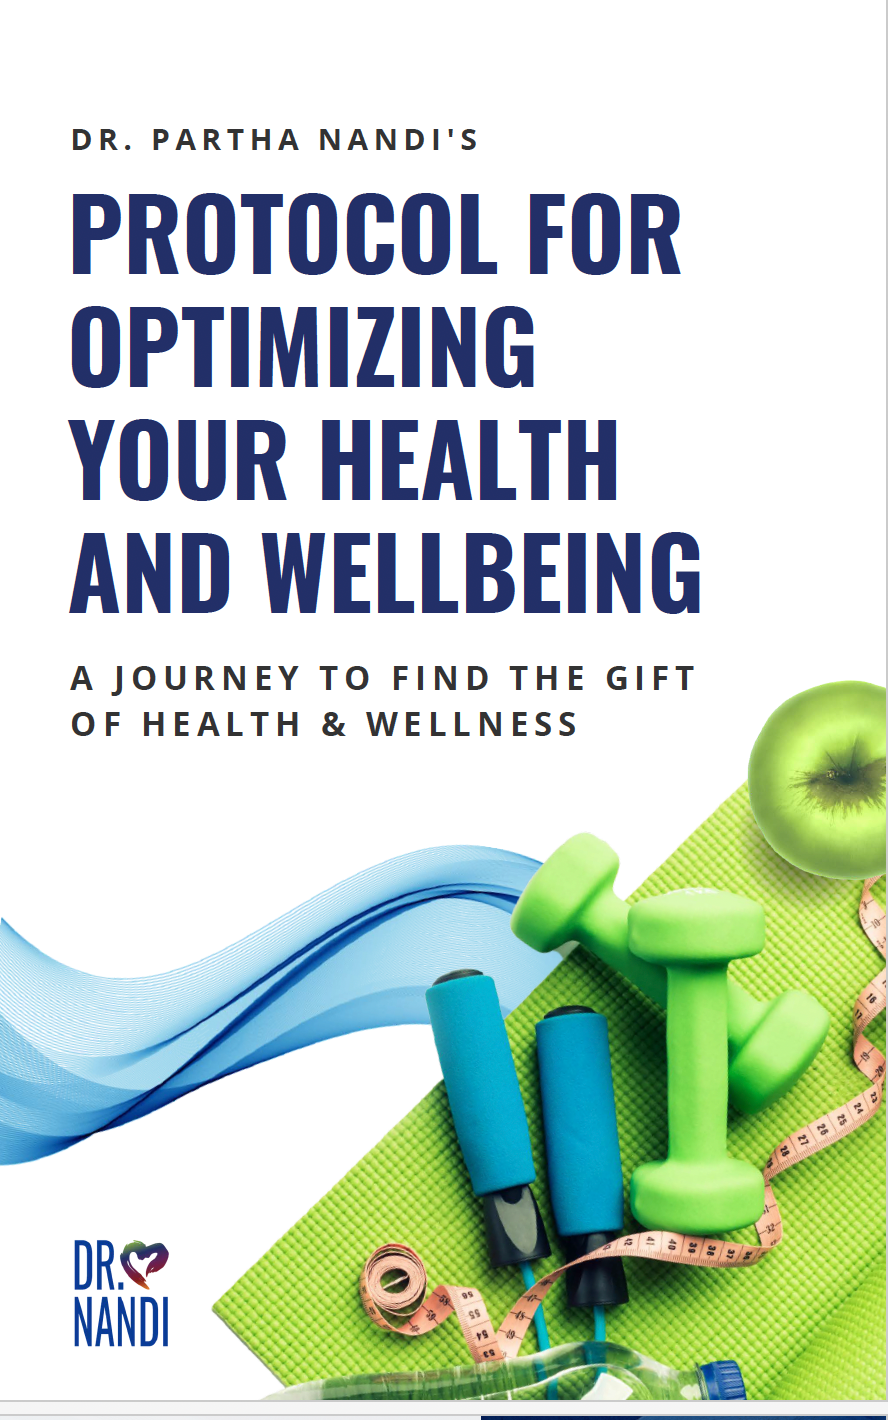 Dr. Partha Nandi's Protocol For Optimizing Your Health & Wellbeing